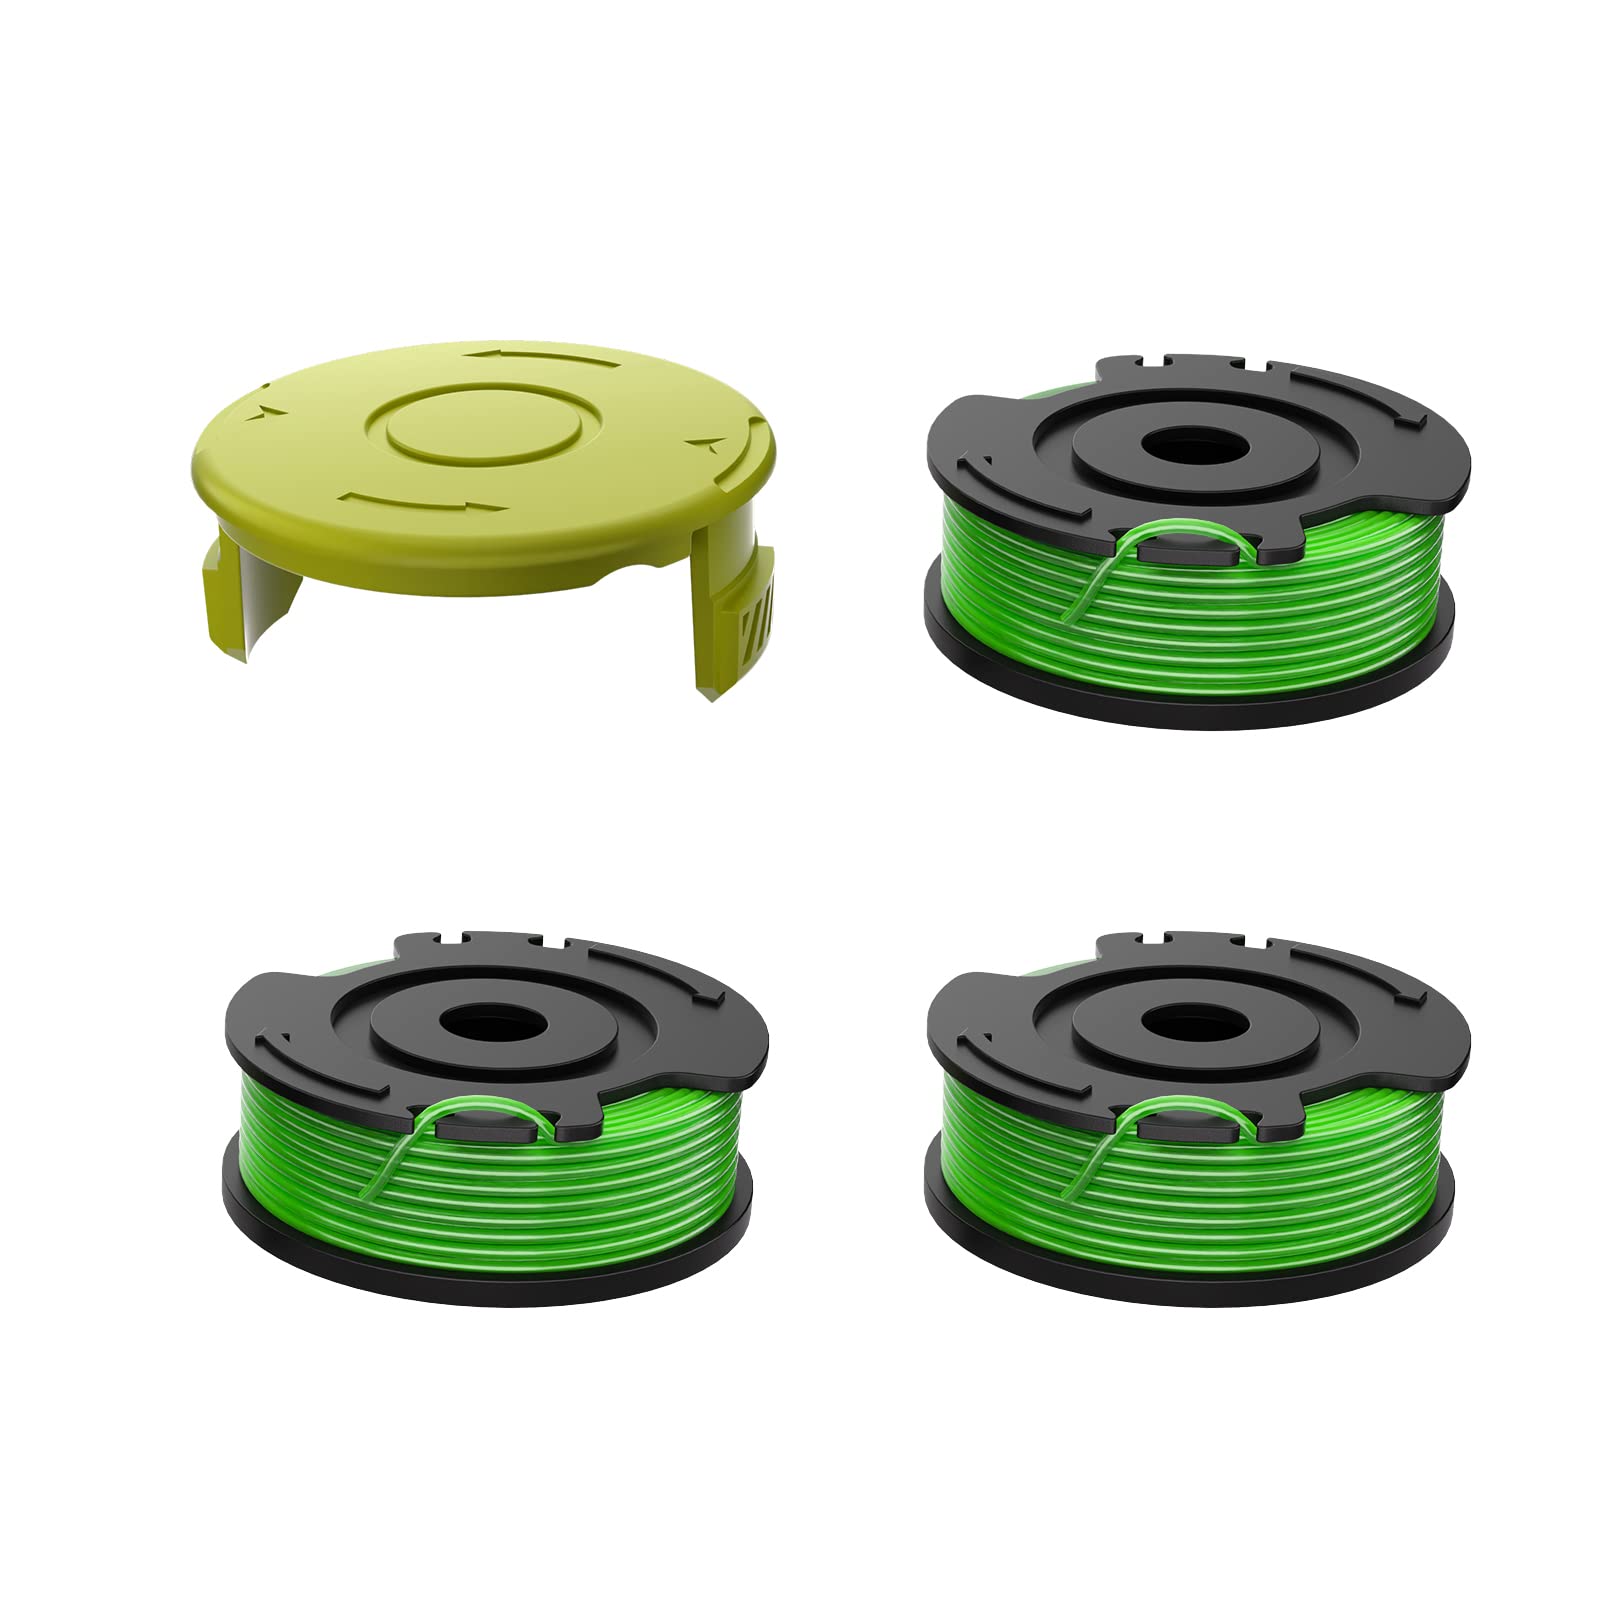 Weed Eater Wacker String 0.065 Trimmer line Spool,Autofeed Black